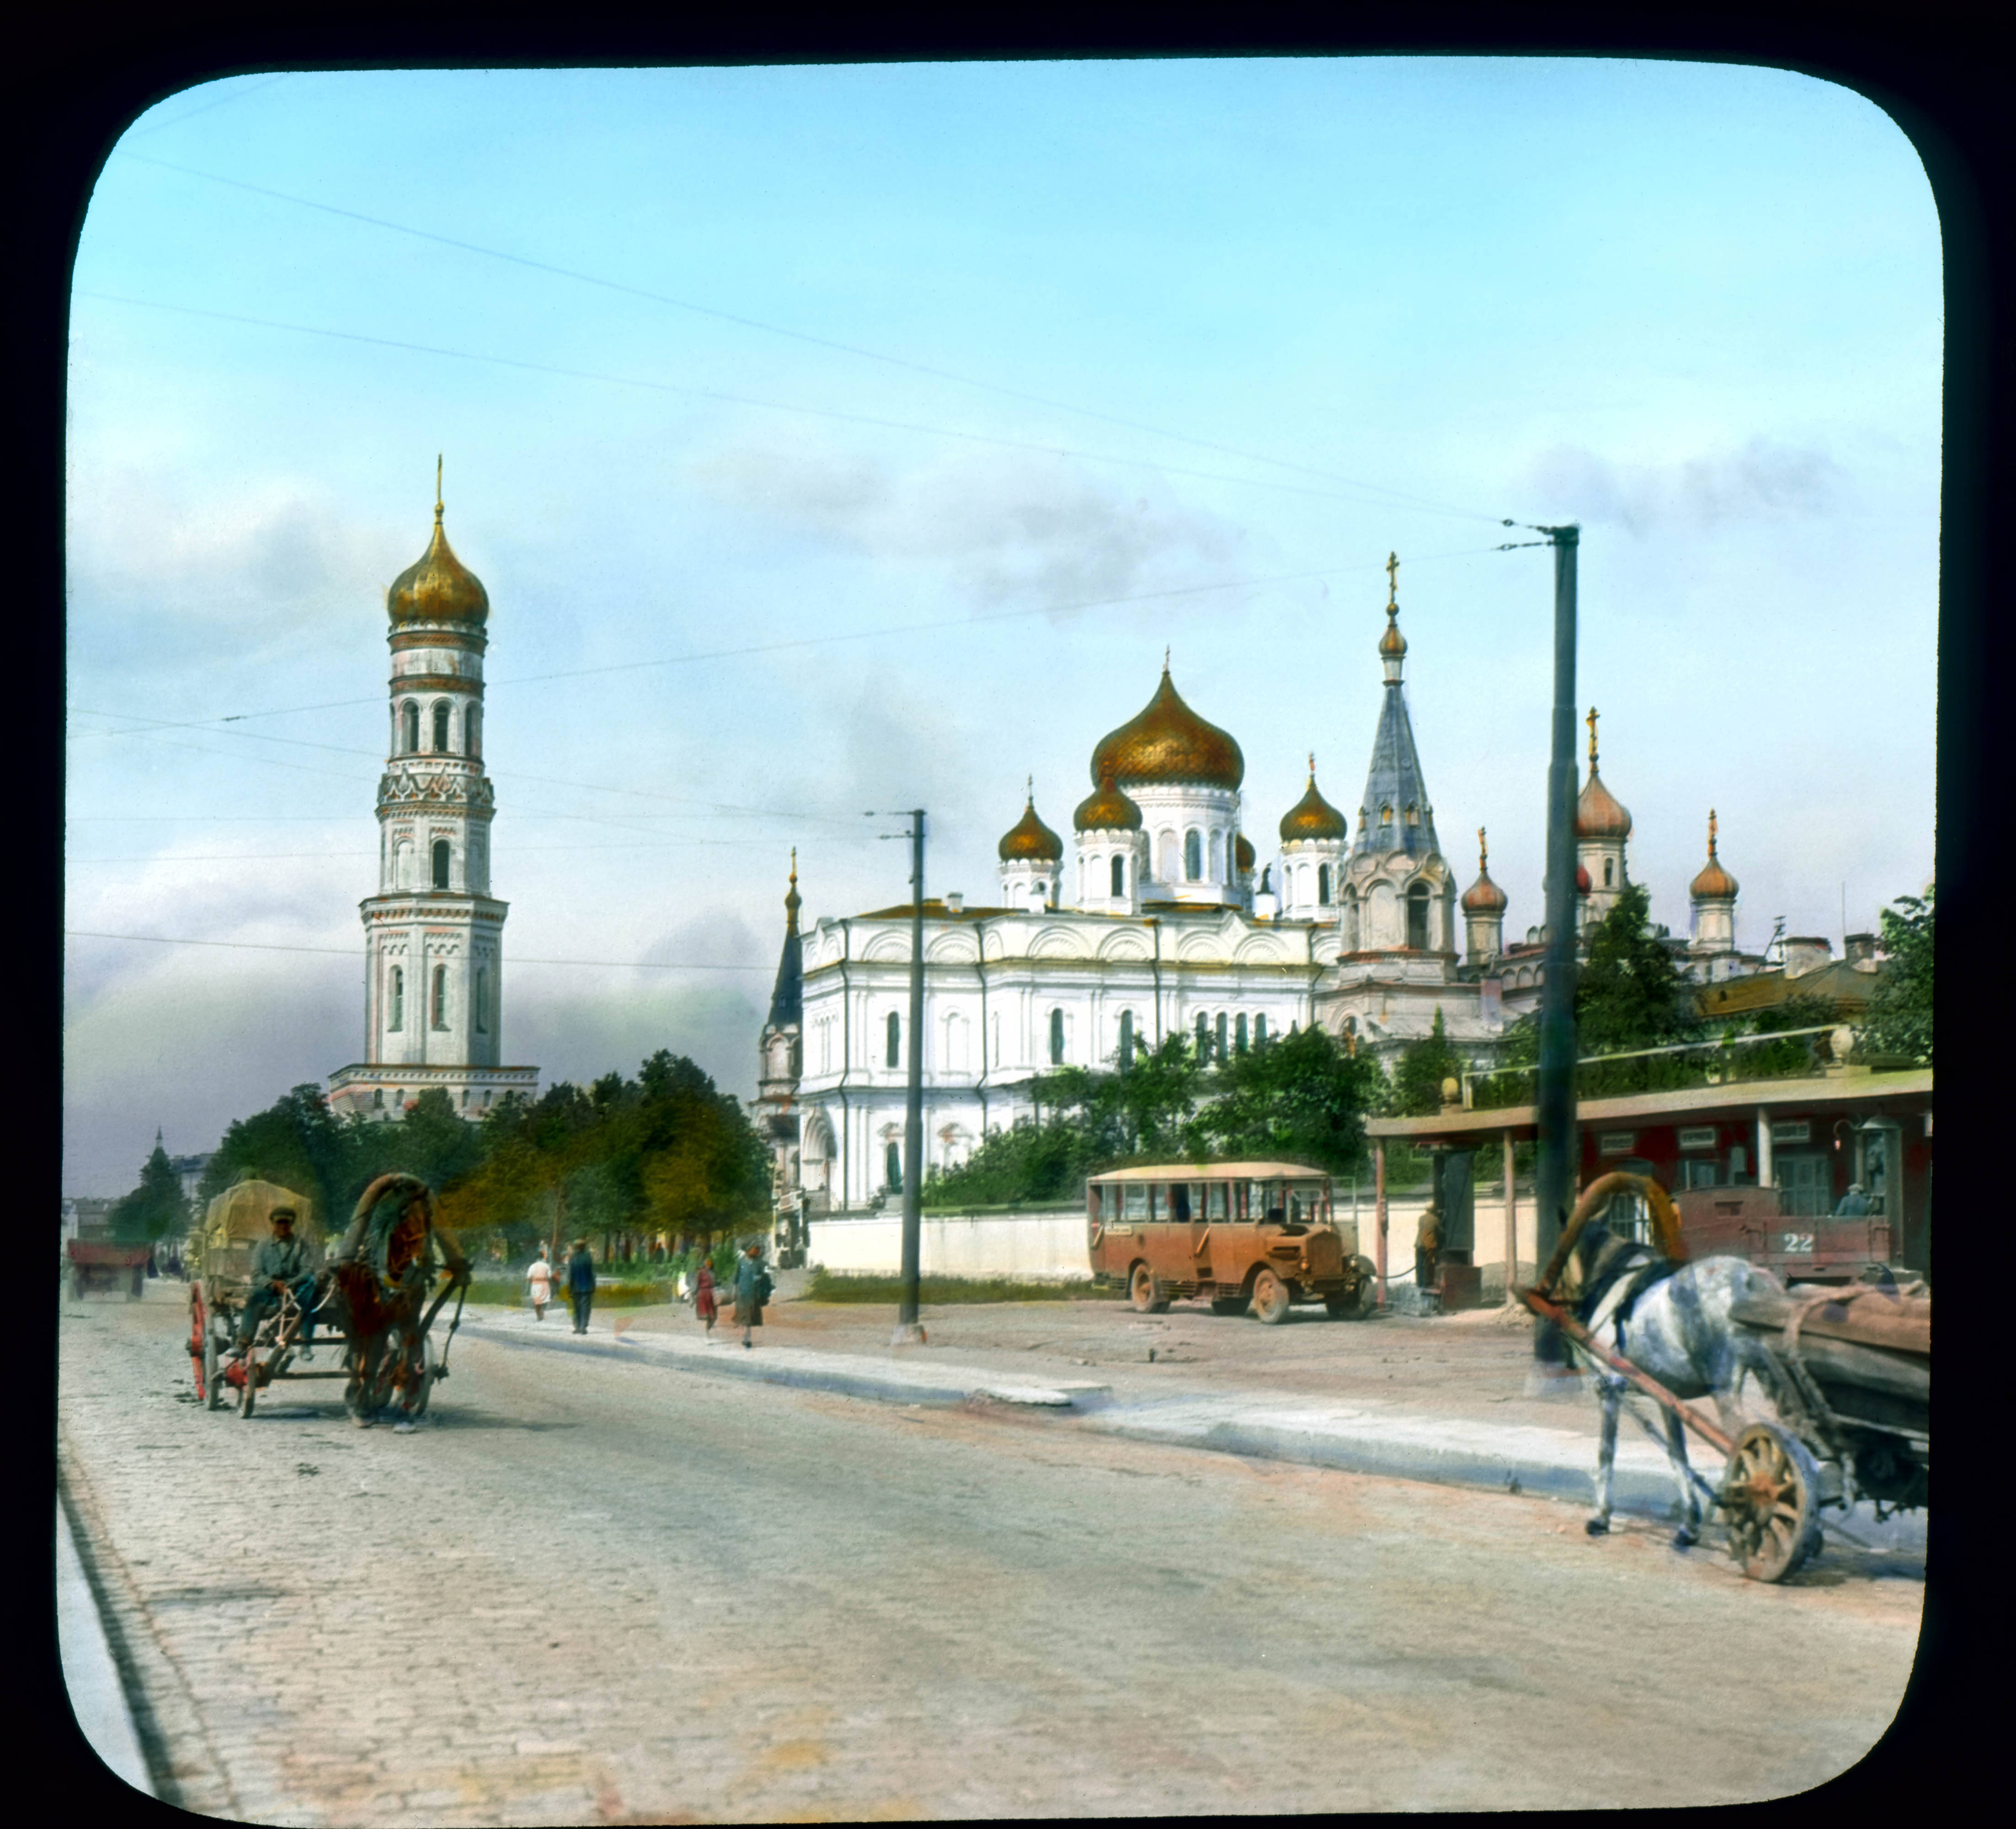 Saint Petersburg. Moskovsky Avenue view of street, with Novodevichy Convent